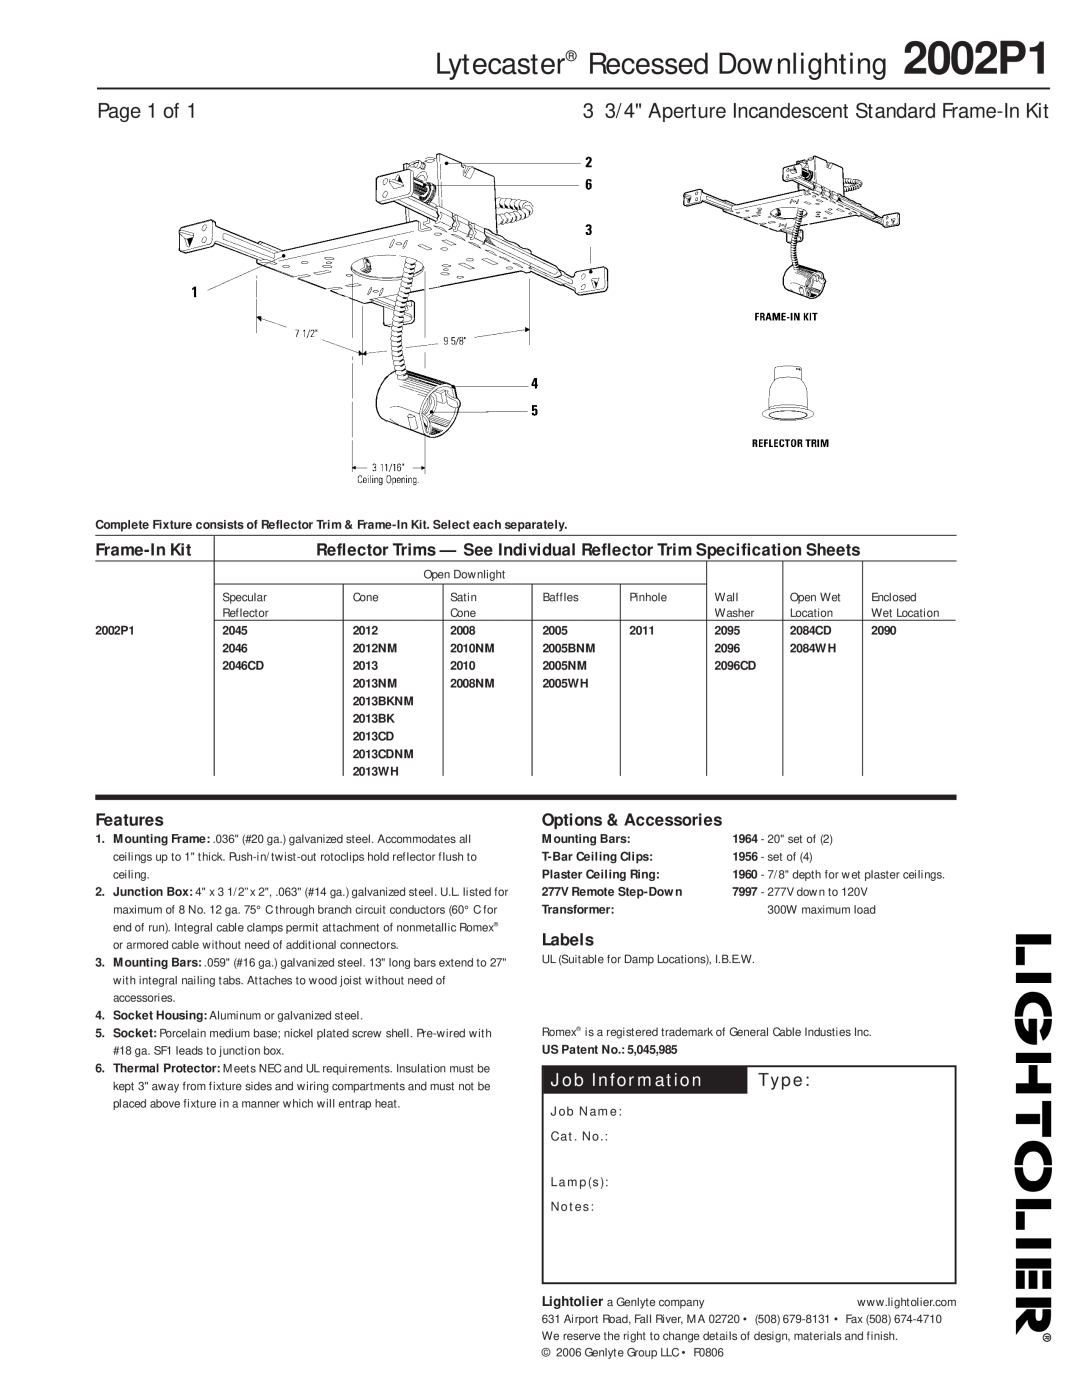 Lightolier specifications Lytecaster Recessed Downlighting 2002P1, Page 1 of, Frame-InKit, Features, Labels, Type 